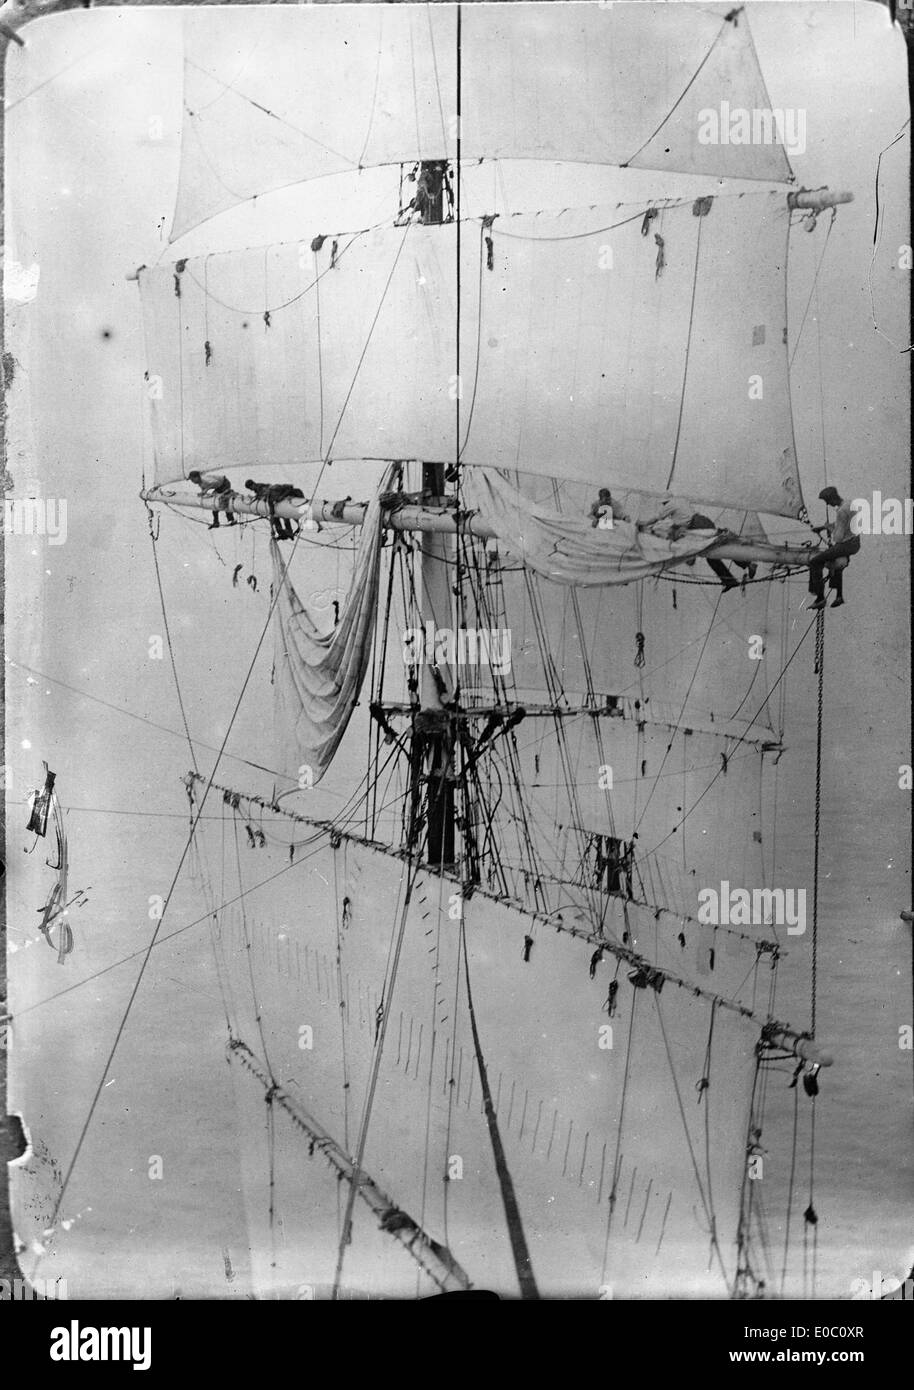 Rigging and sailors, ca 1900 Stock Photo